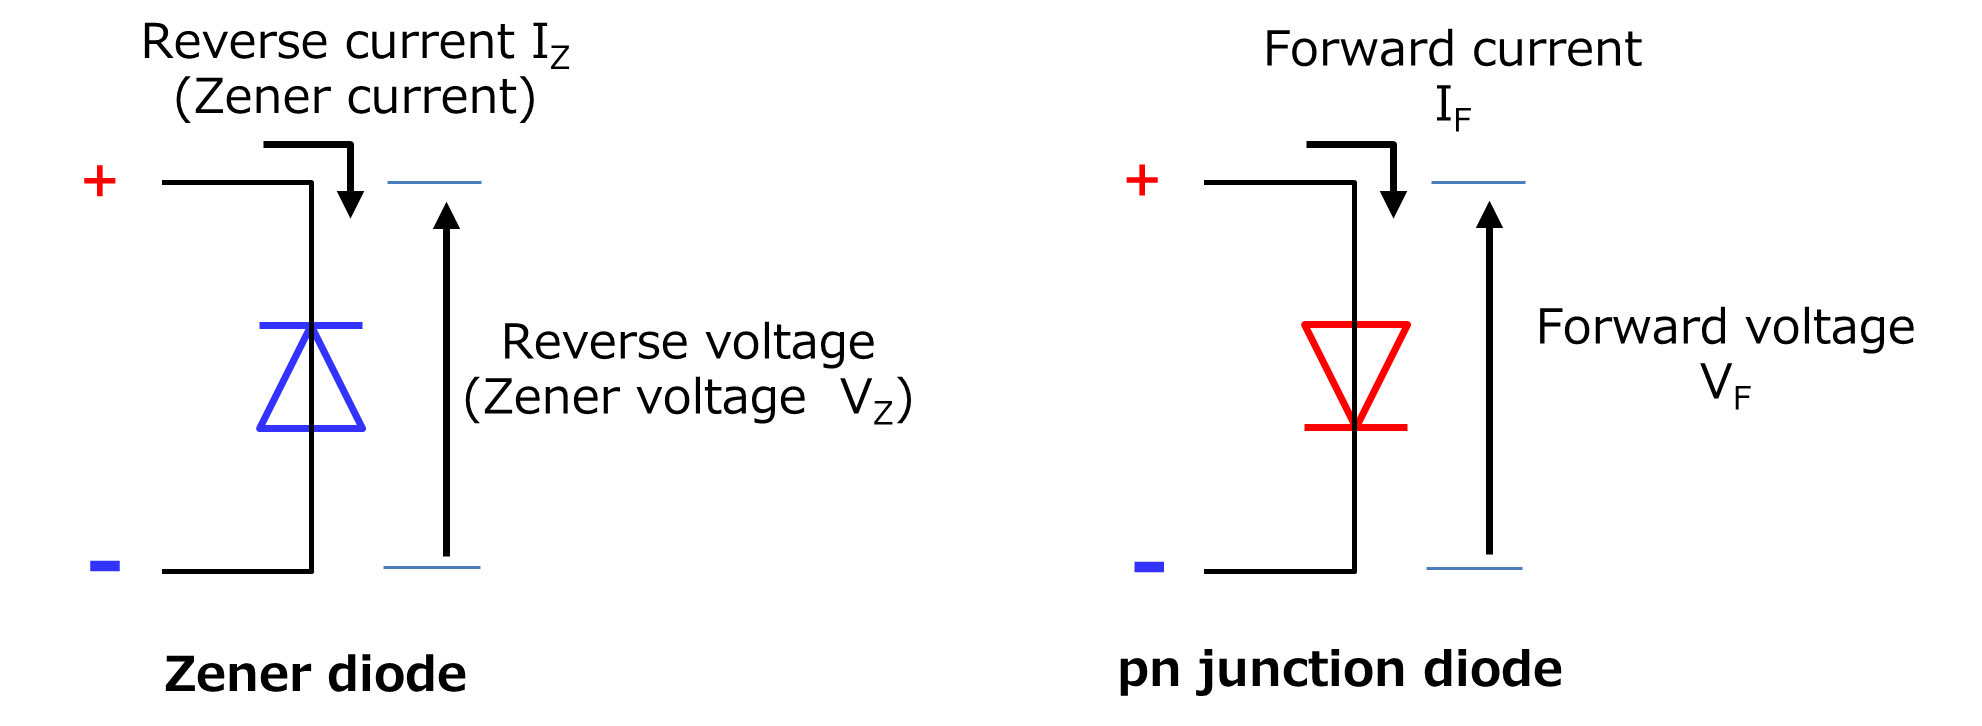 Fig. 2 Definition of diode voltage and current